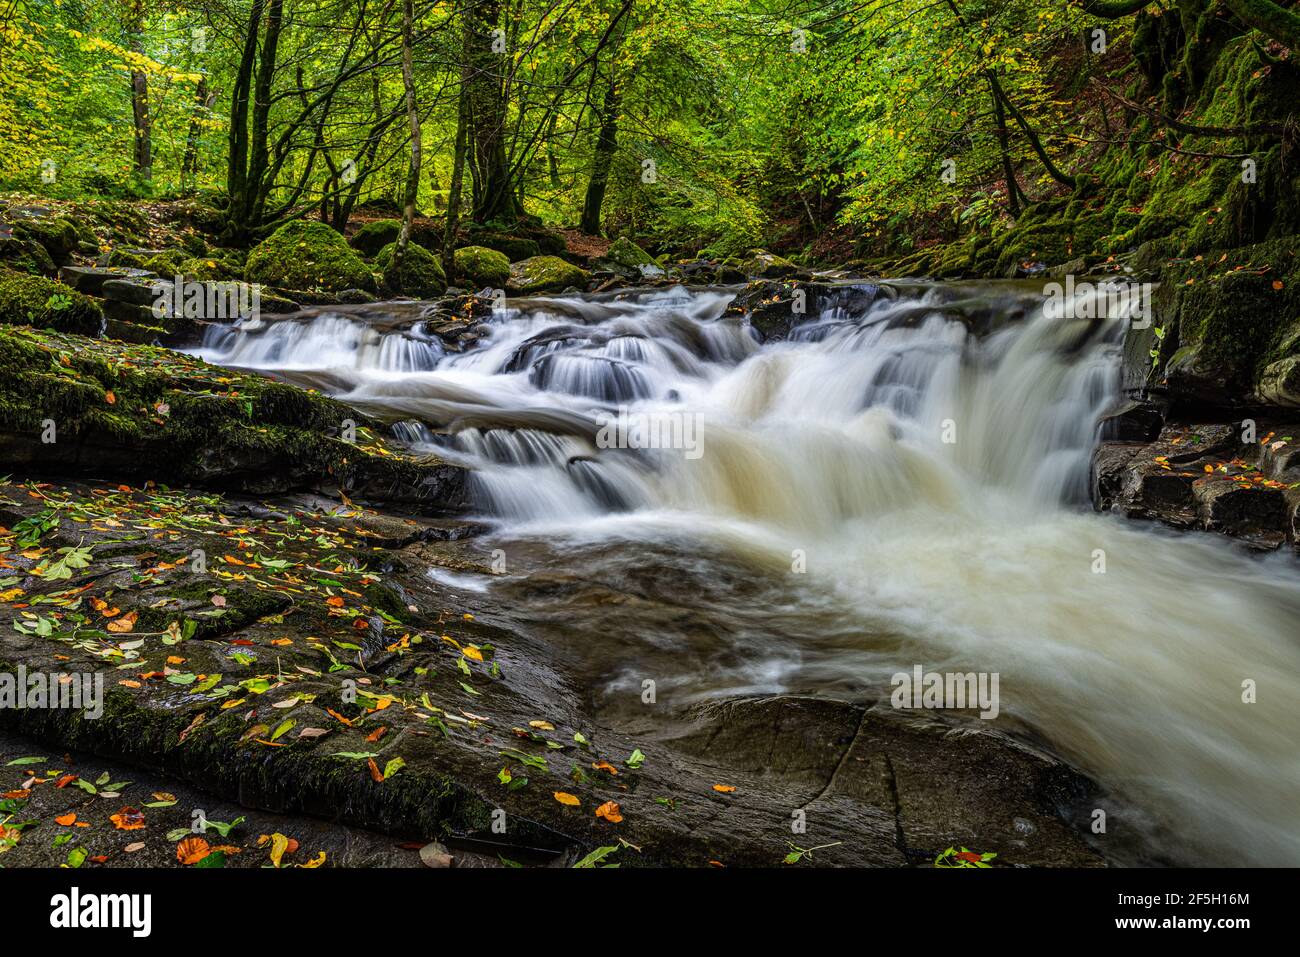 Small waterfalls in the Moness gorge at the Birks o Aberfeldy in the Perthshire countryside, Scottish Highlands Stock Photo